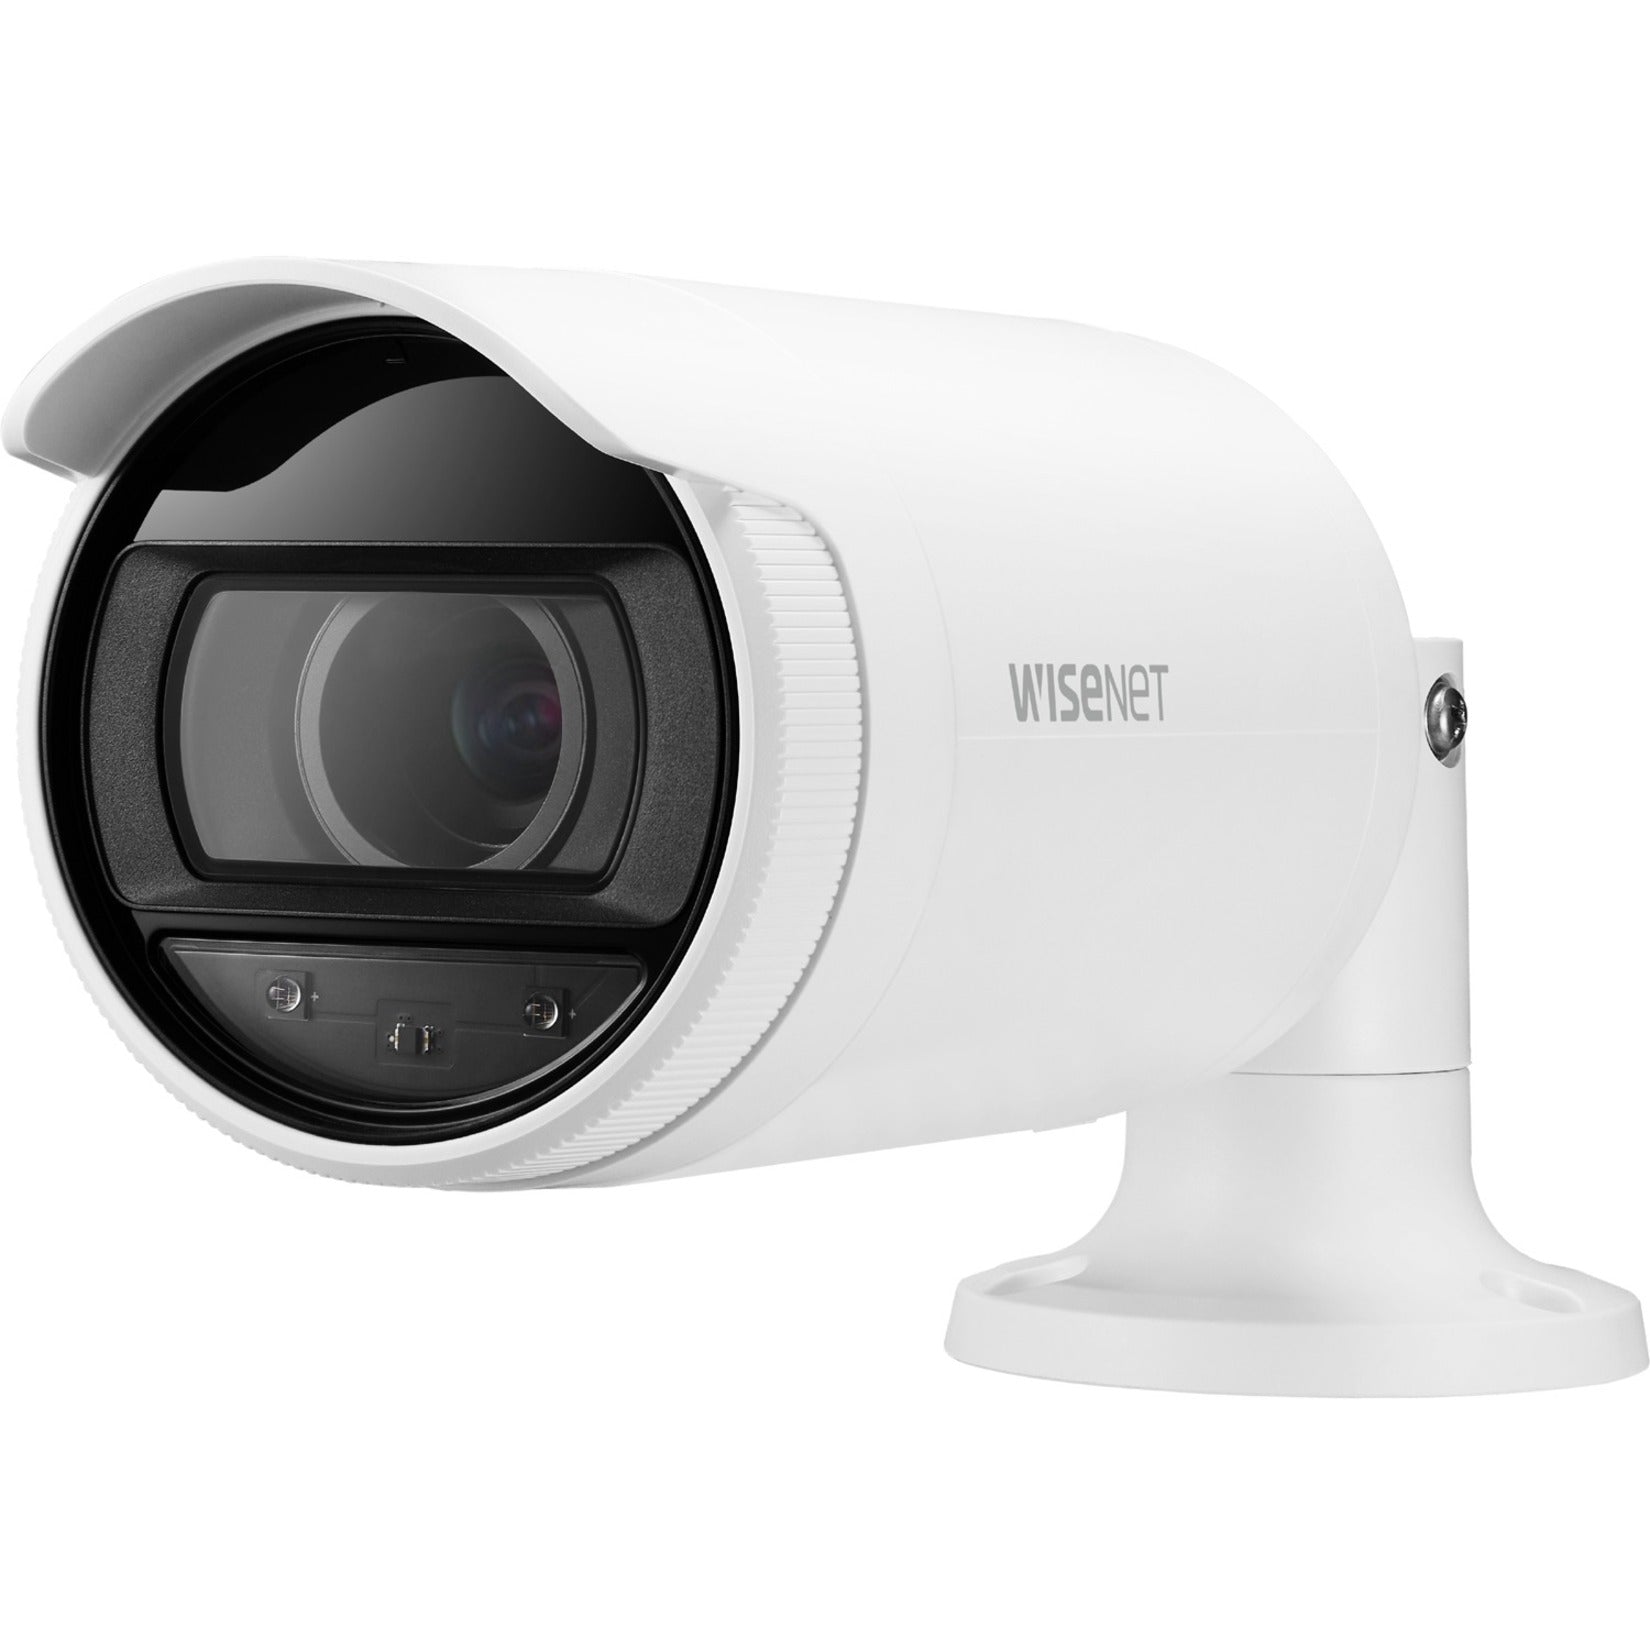 Wisenet ANO-L7082R 4MP IR Bullet Network Camera, Color, Varifocal Lens, 3.1x Optical Zoom, H.265/H.264 Video Formats, 2560 x 1440 Resolution, Memory Card Storage, Motion Detection, IP66 Rated